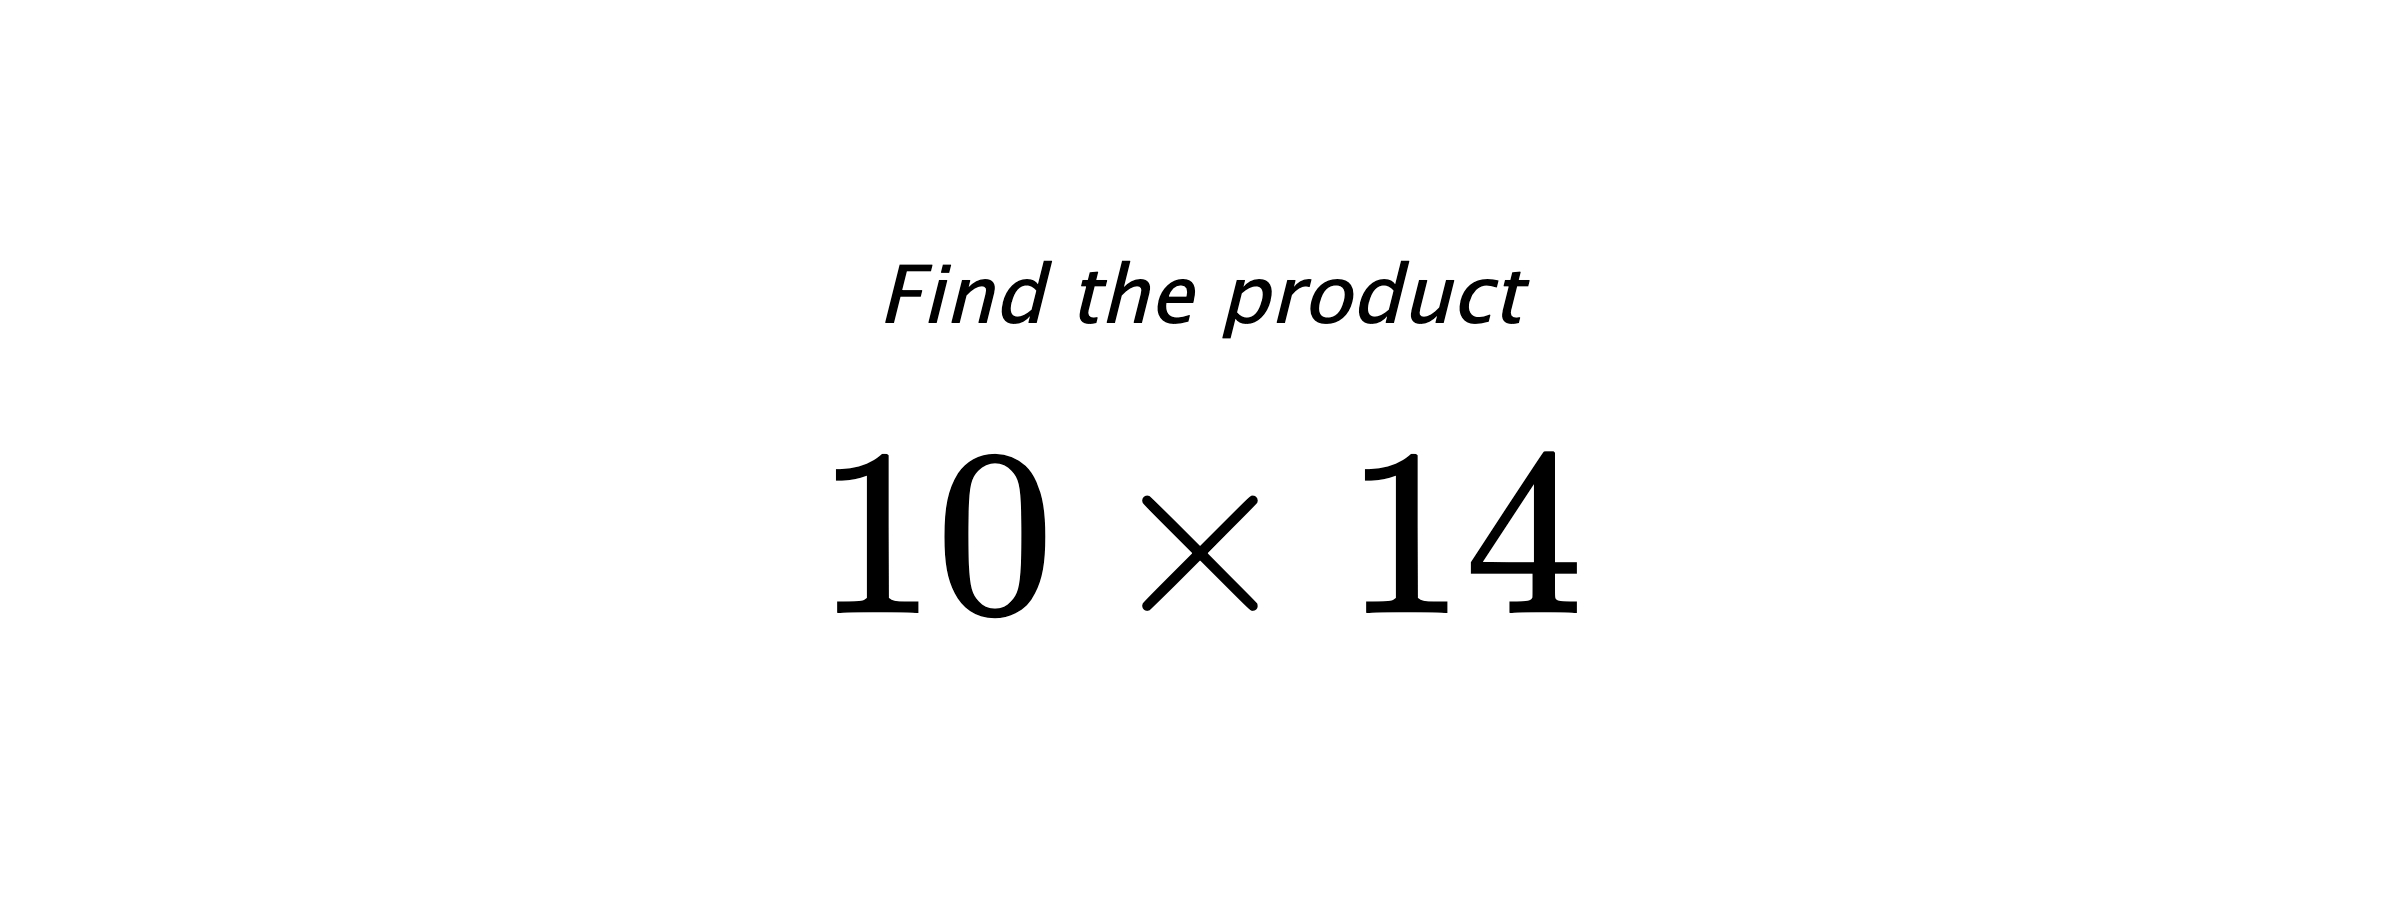 Find the product $ 10 \times 14 $